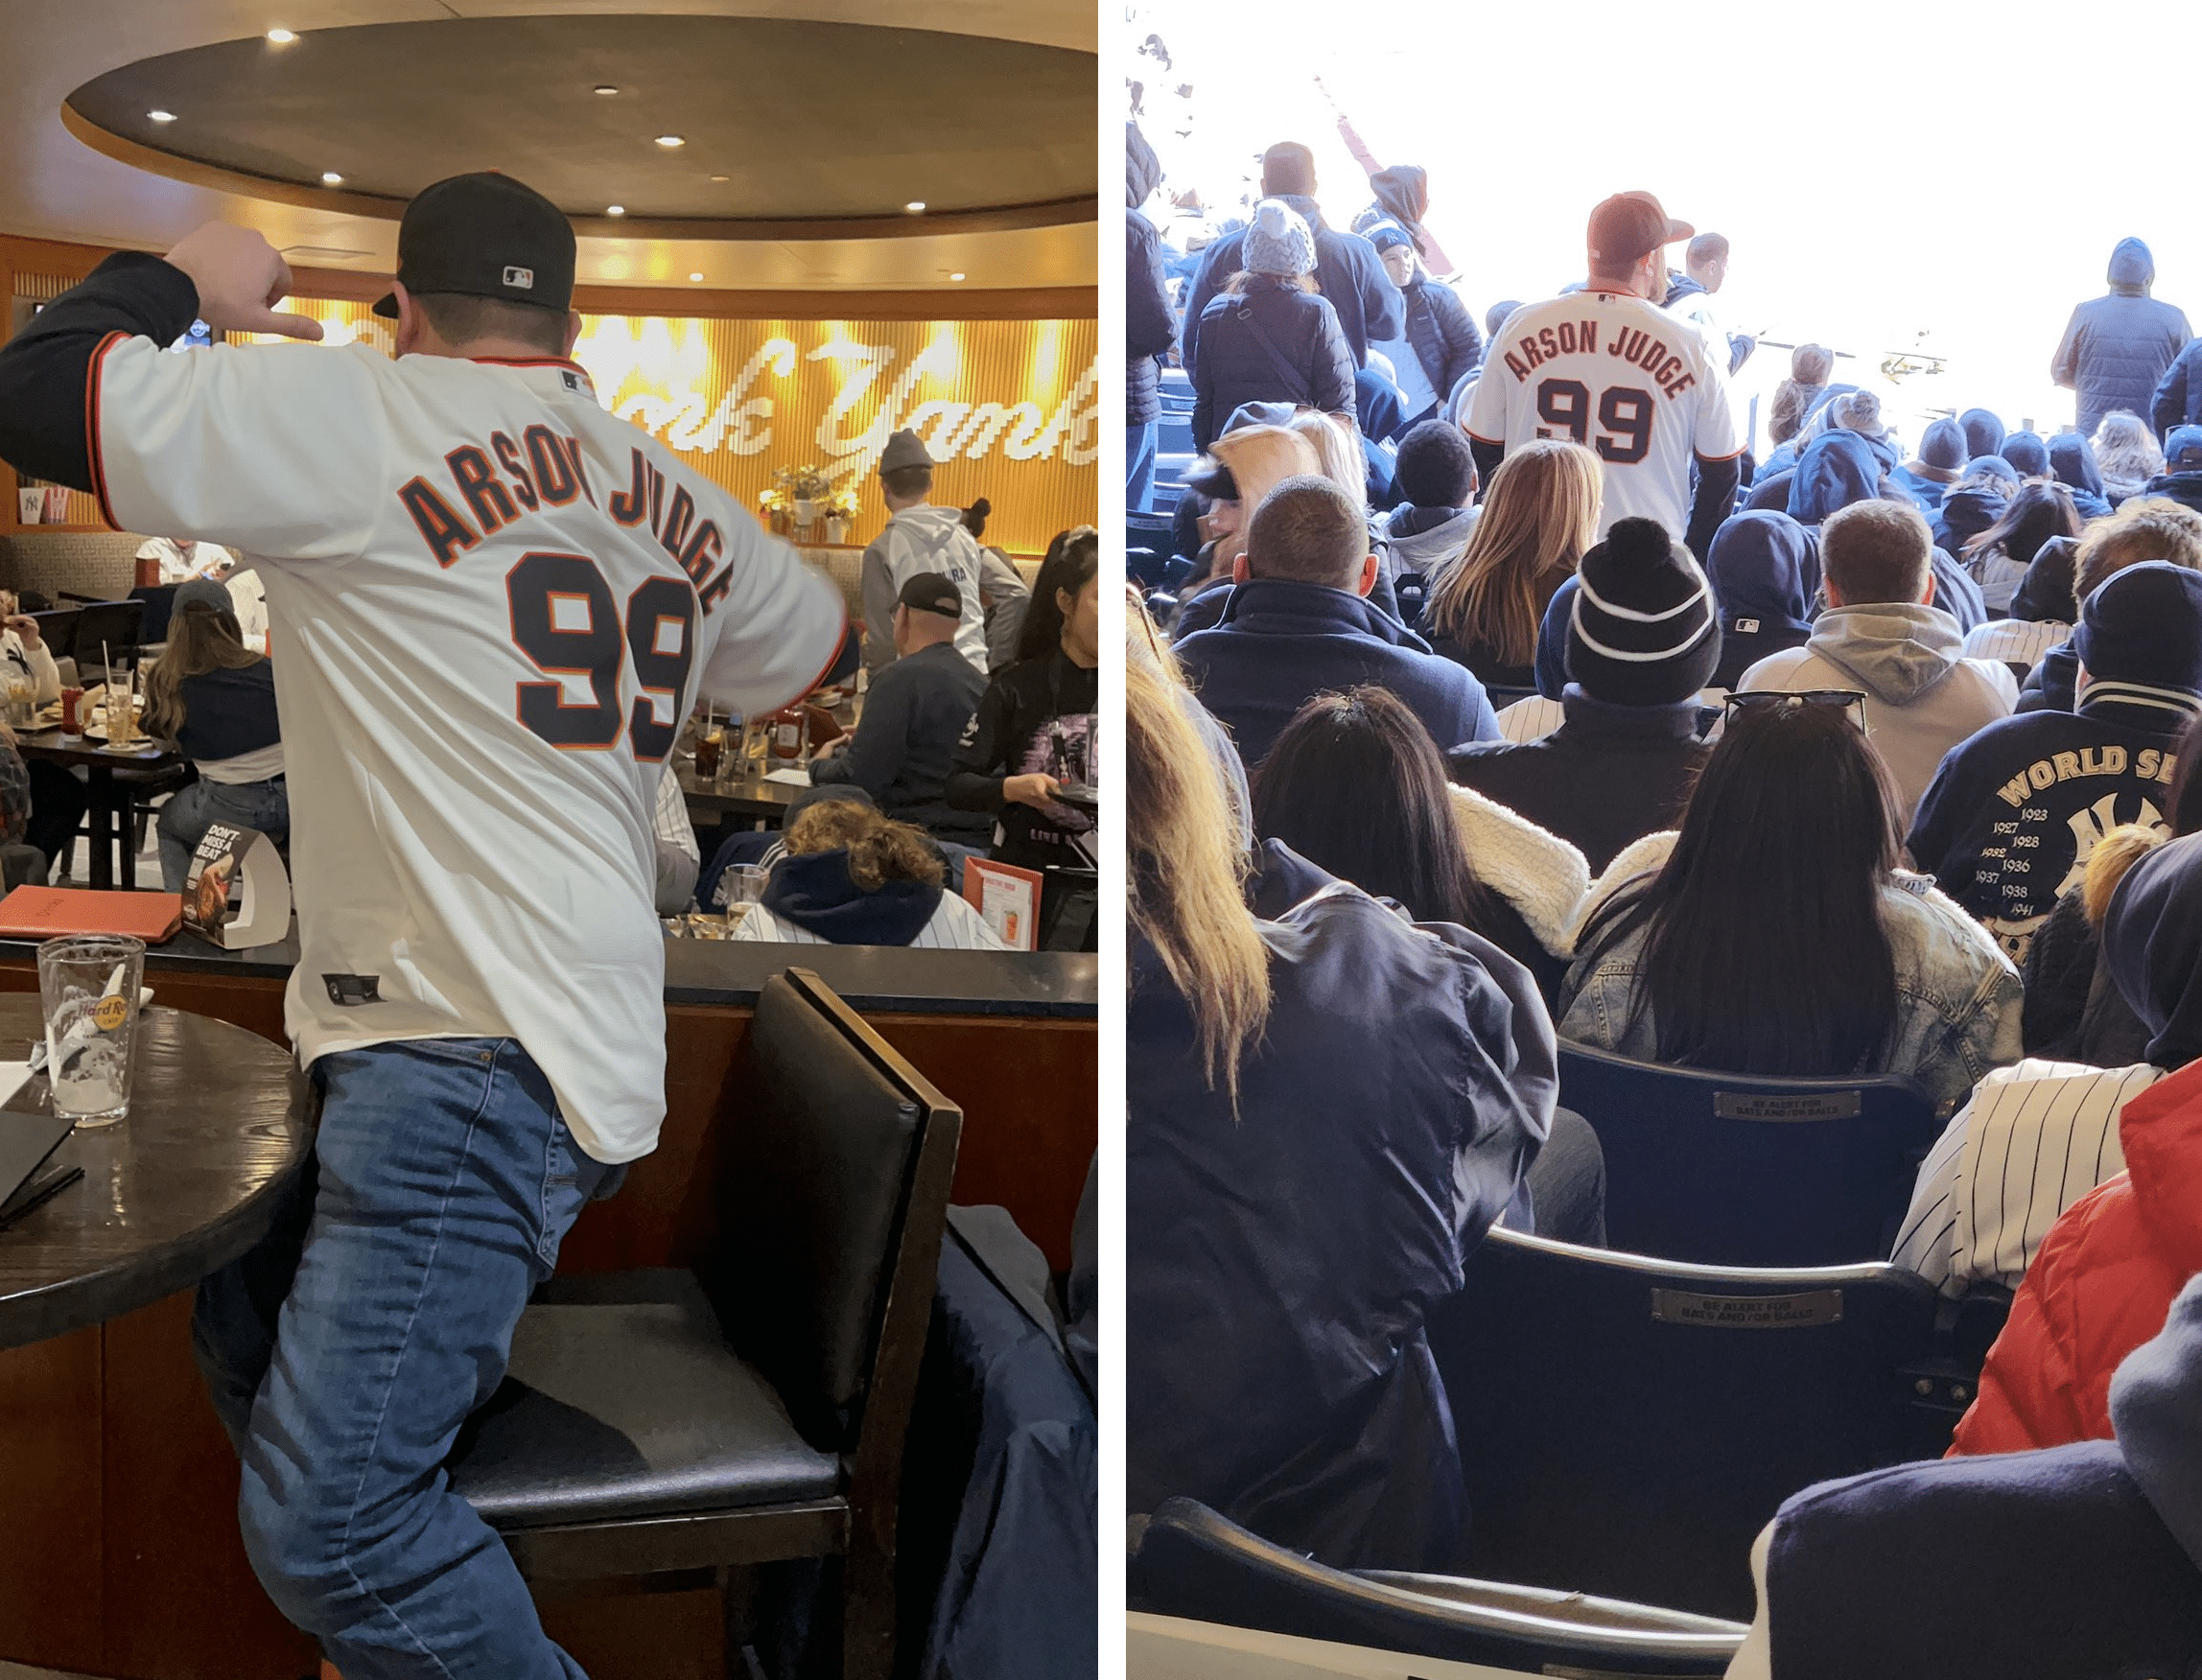 Fan Wearing 'Arson Judge' Jersey to Giants at Yankees Opening Day Game